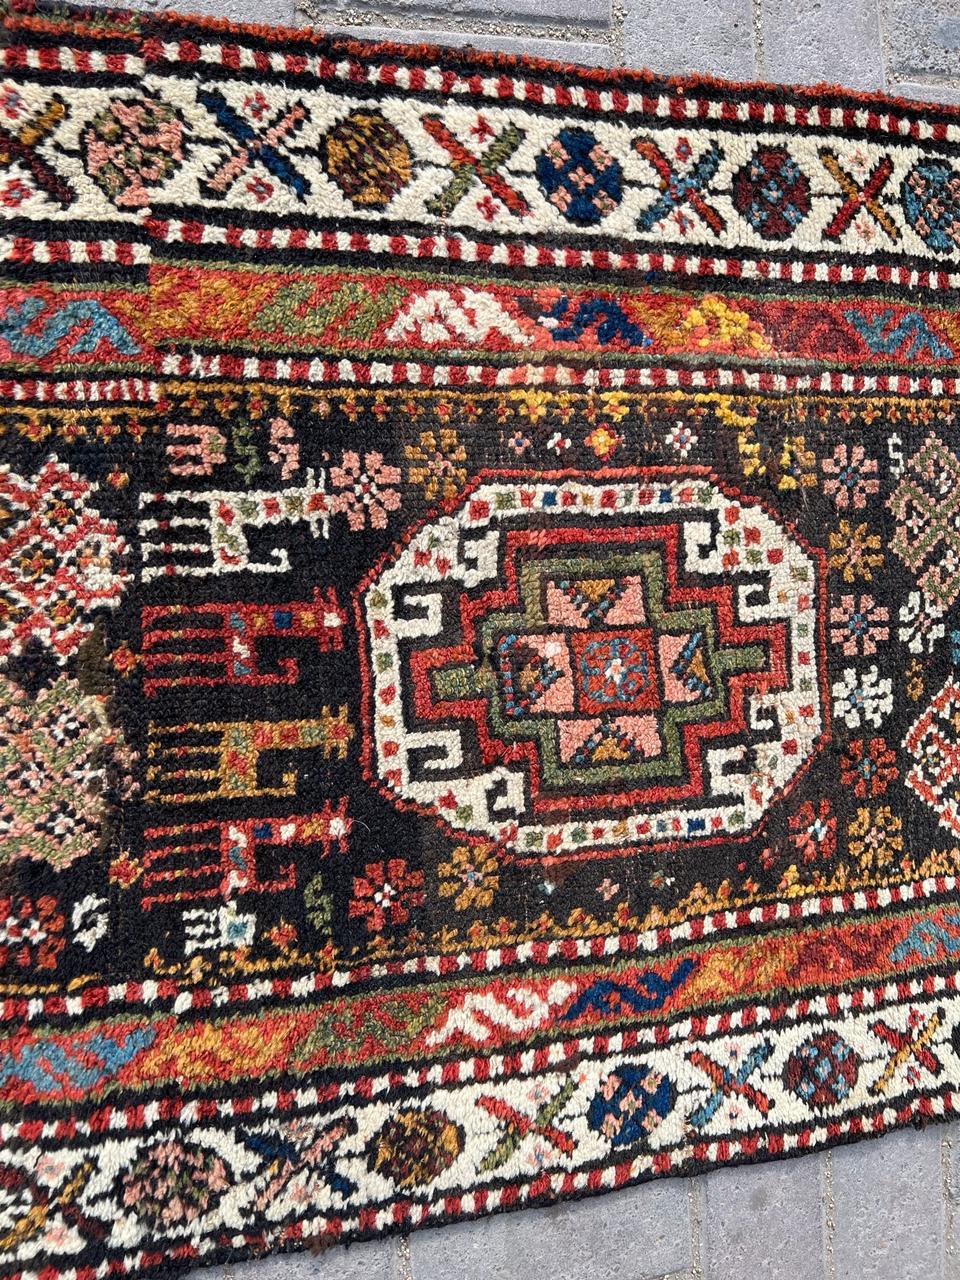 Indulge in the allure of Persian heritage with this Handmade Antique Persian Kurdish Runner Rug from the 1900s. Measuring 2.5 feet in width and 11.8 feet in length (76cm x 359cm), this remarkable runner rug is a rare find, ideal for adding a touch